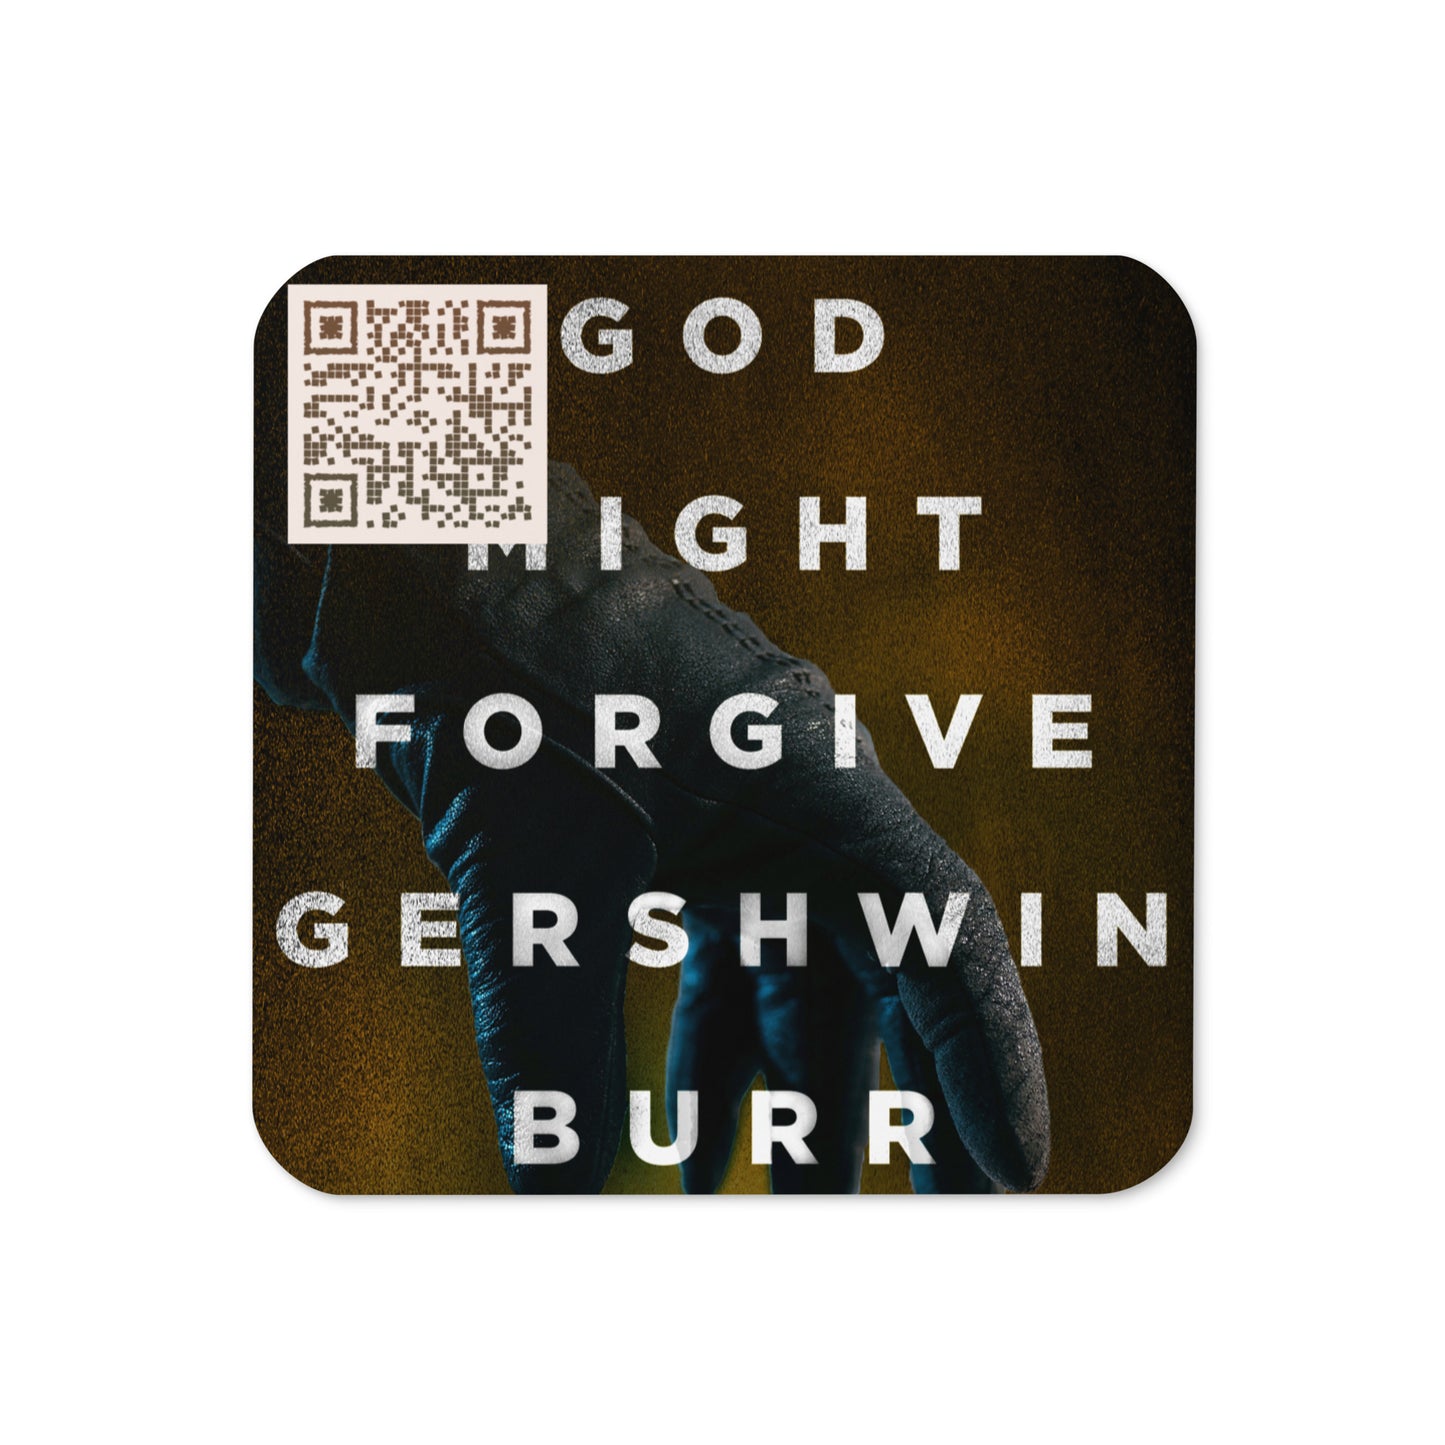 coaster with cover art from Brian Prousky's book God Might Forgive Gershwin Burr